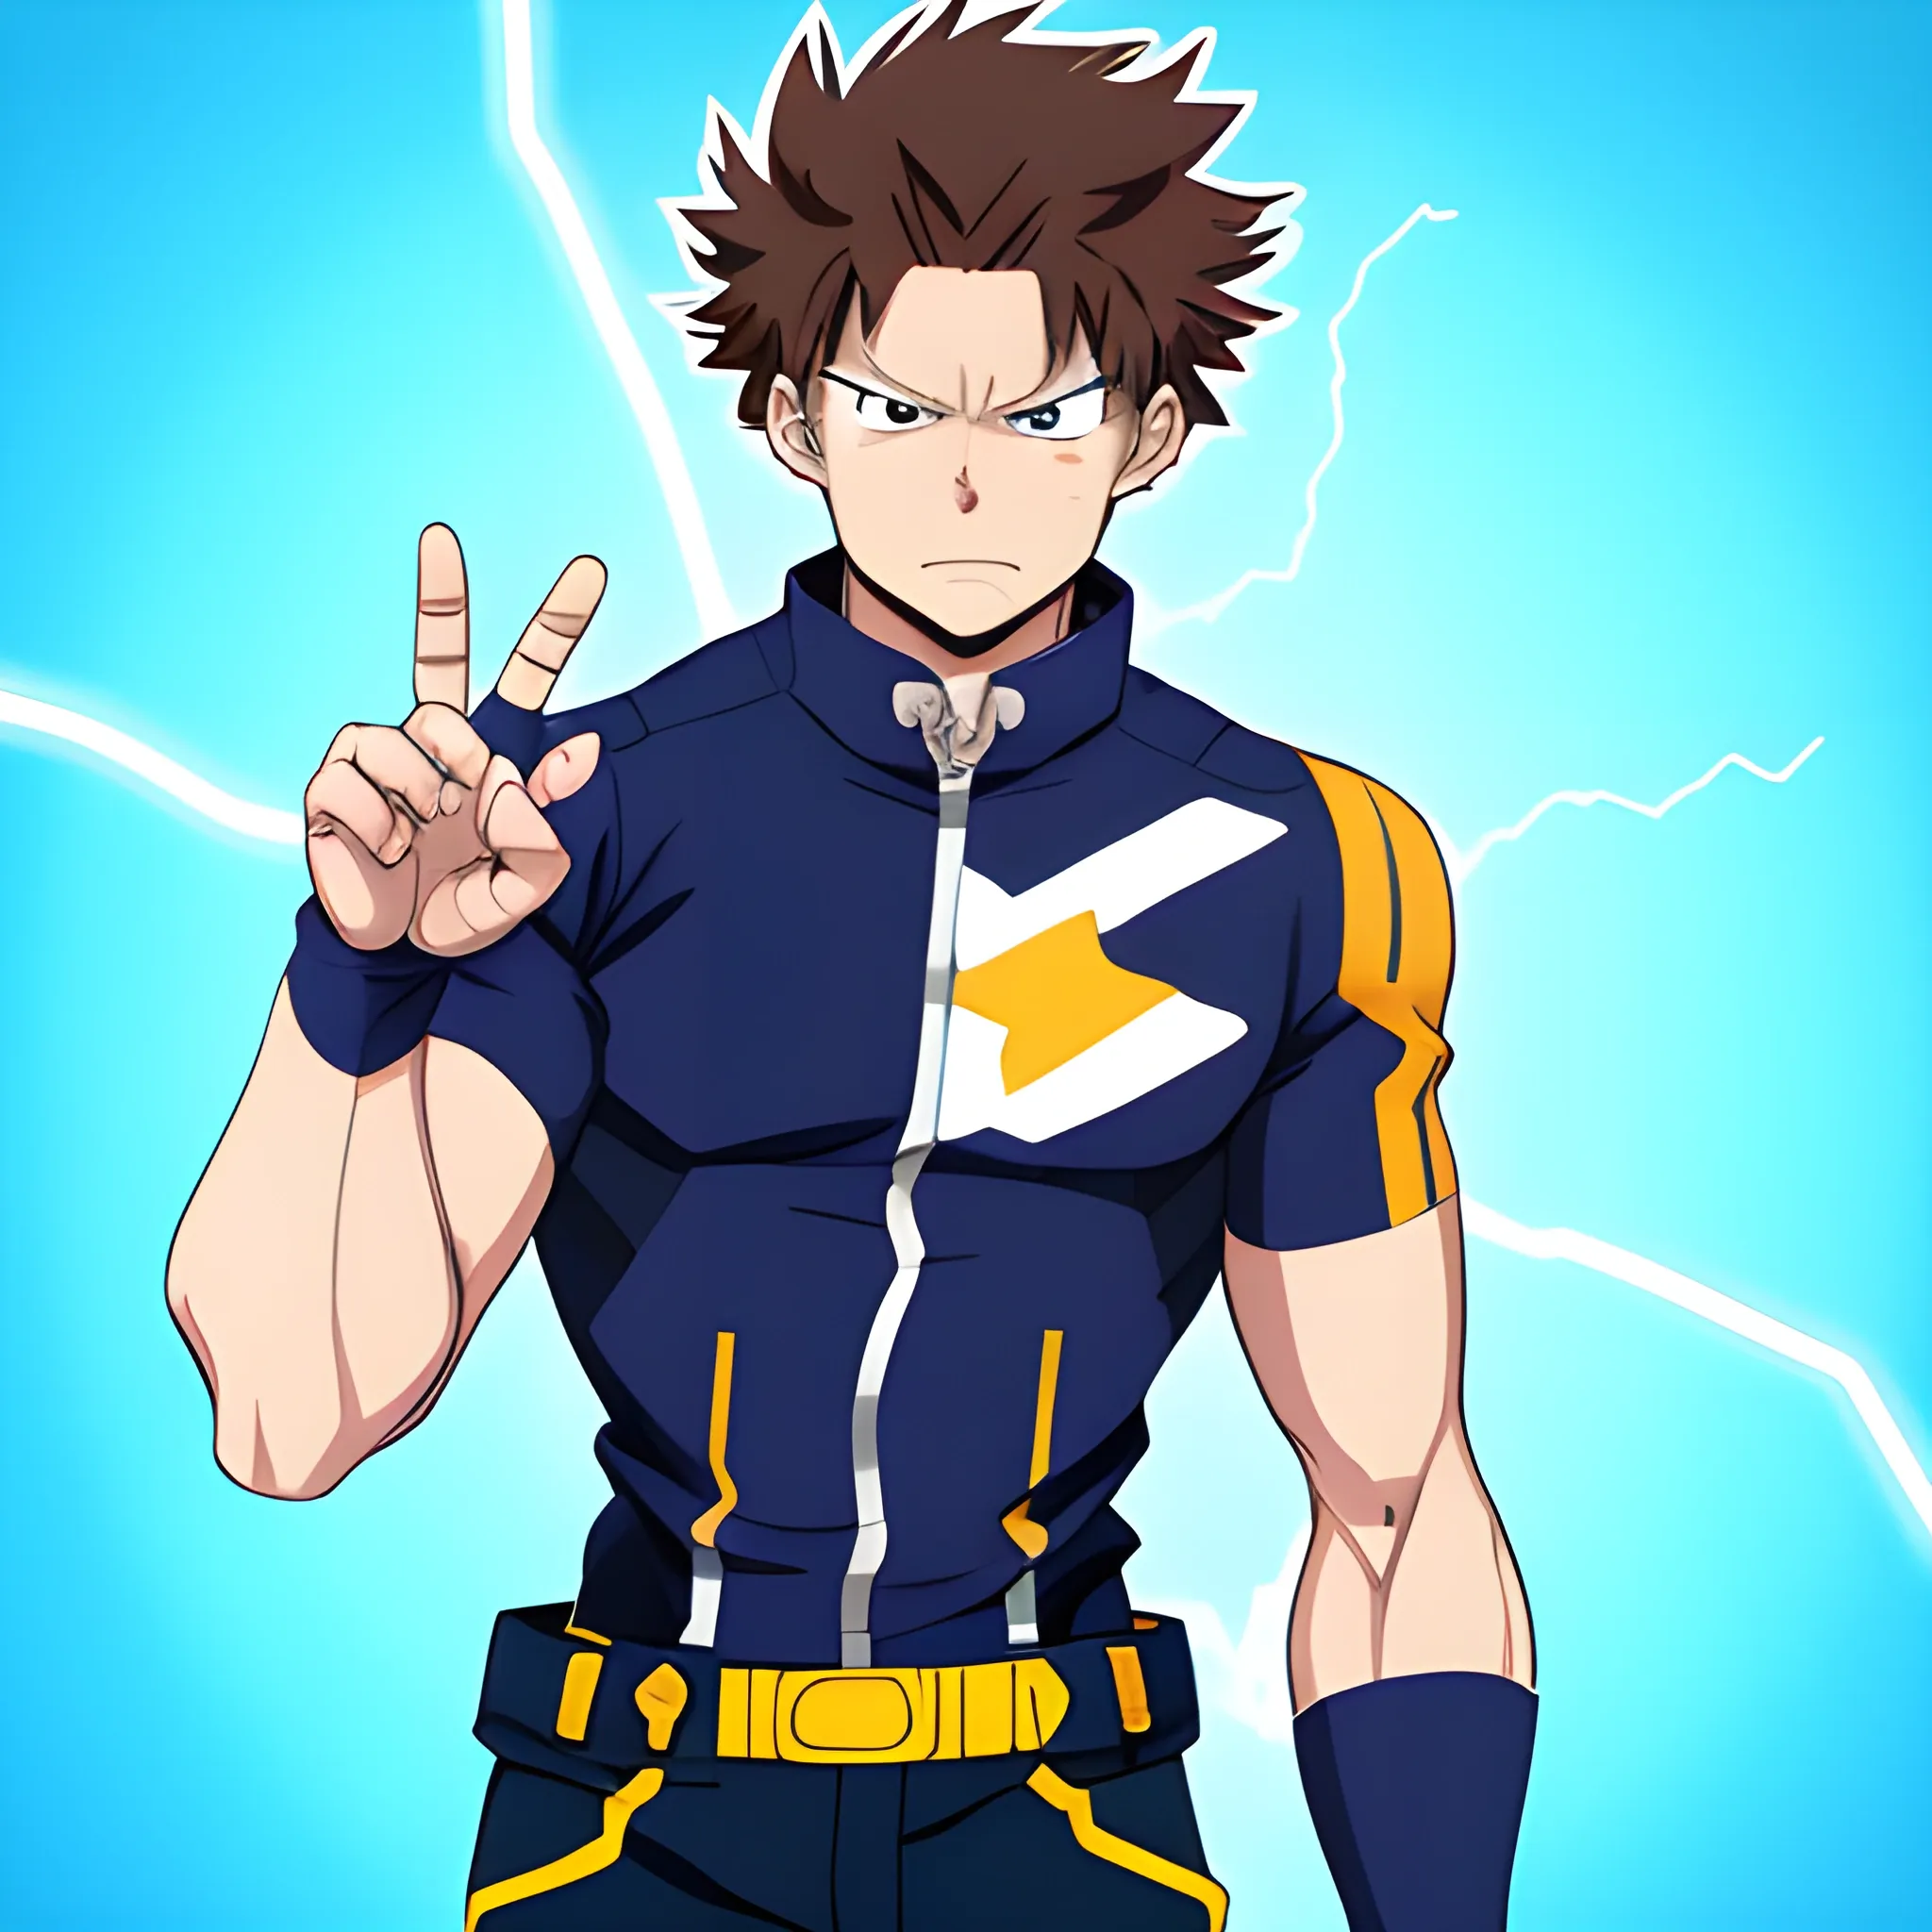 my hero academia male oc with brown hair and brown eyes and blue electricity around hands looking melancholic